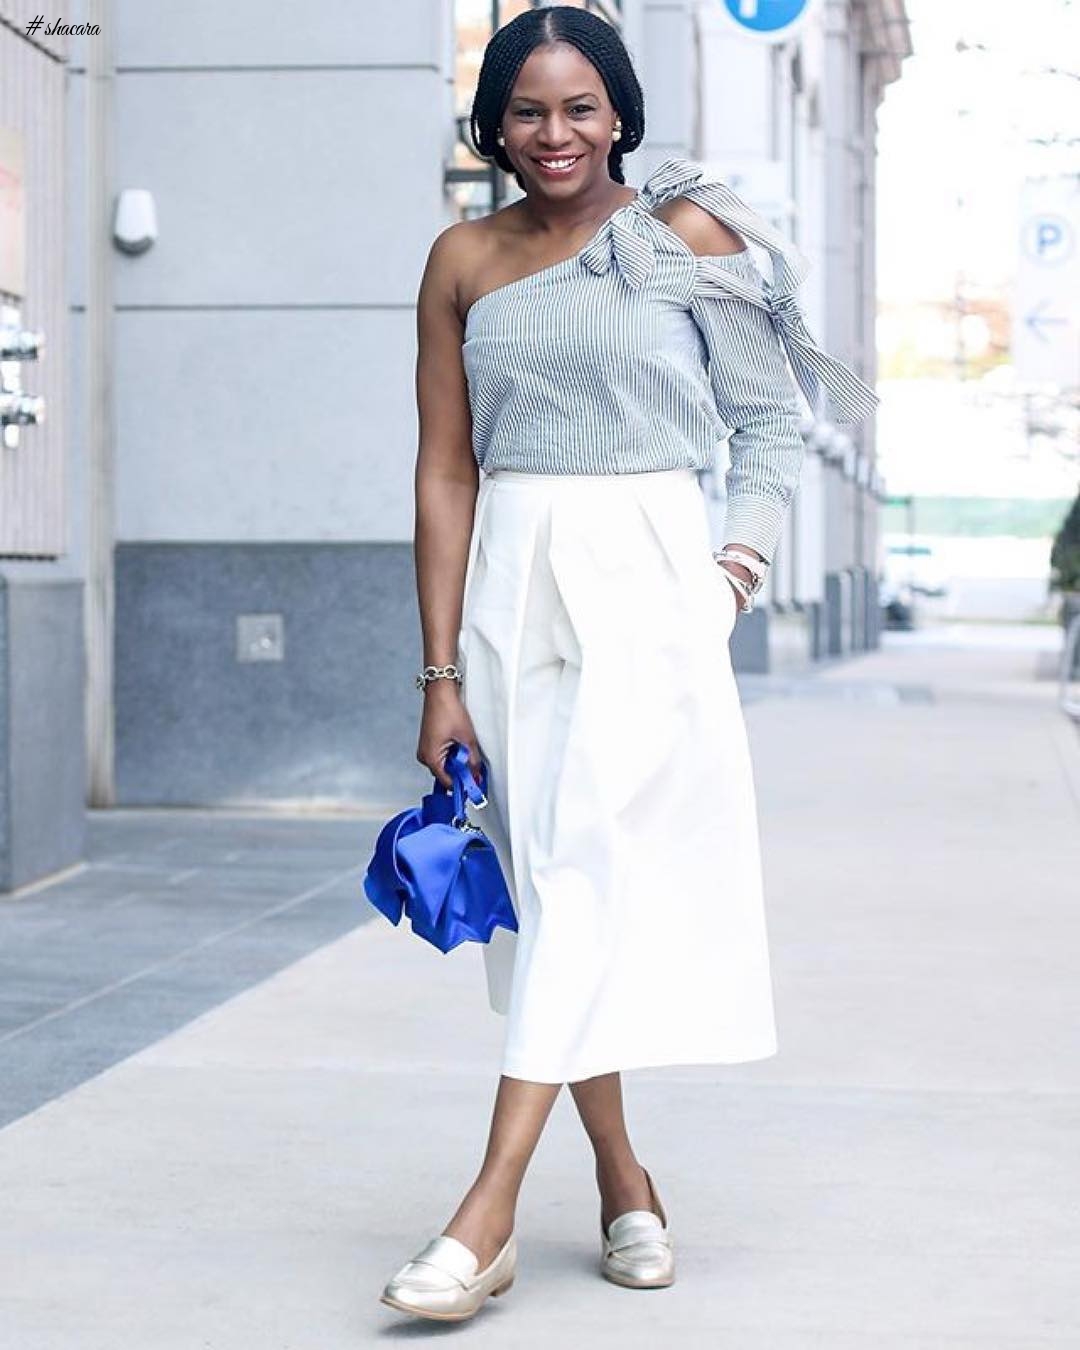 SEE THE CORPORATE ATTIRES THAT FASHIONISTAS ARE ROCKING THIS TIME!